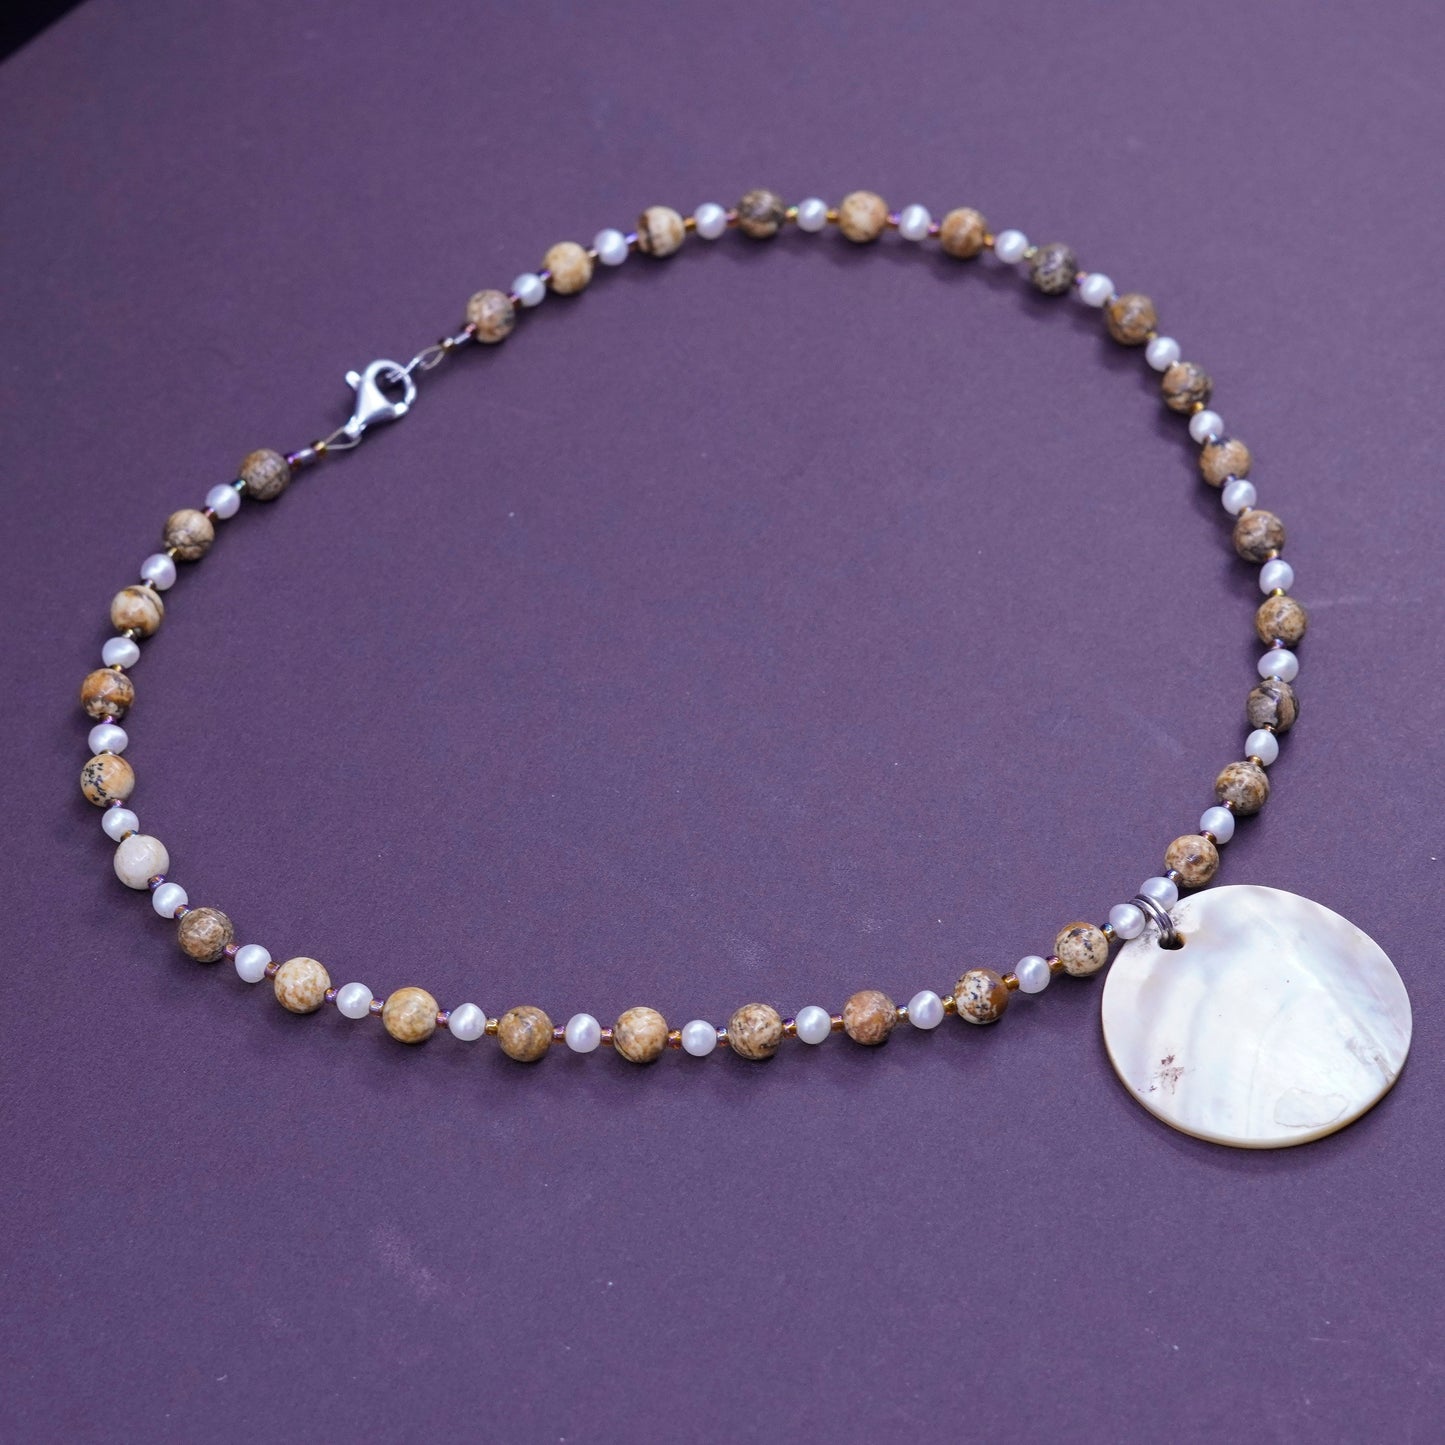 16” Vintage Sterling silver Handmade necklace with jasper and pearl beads